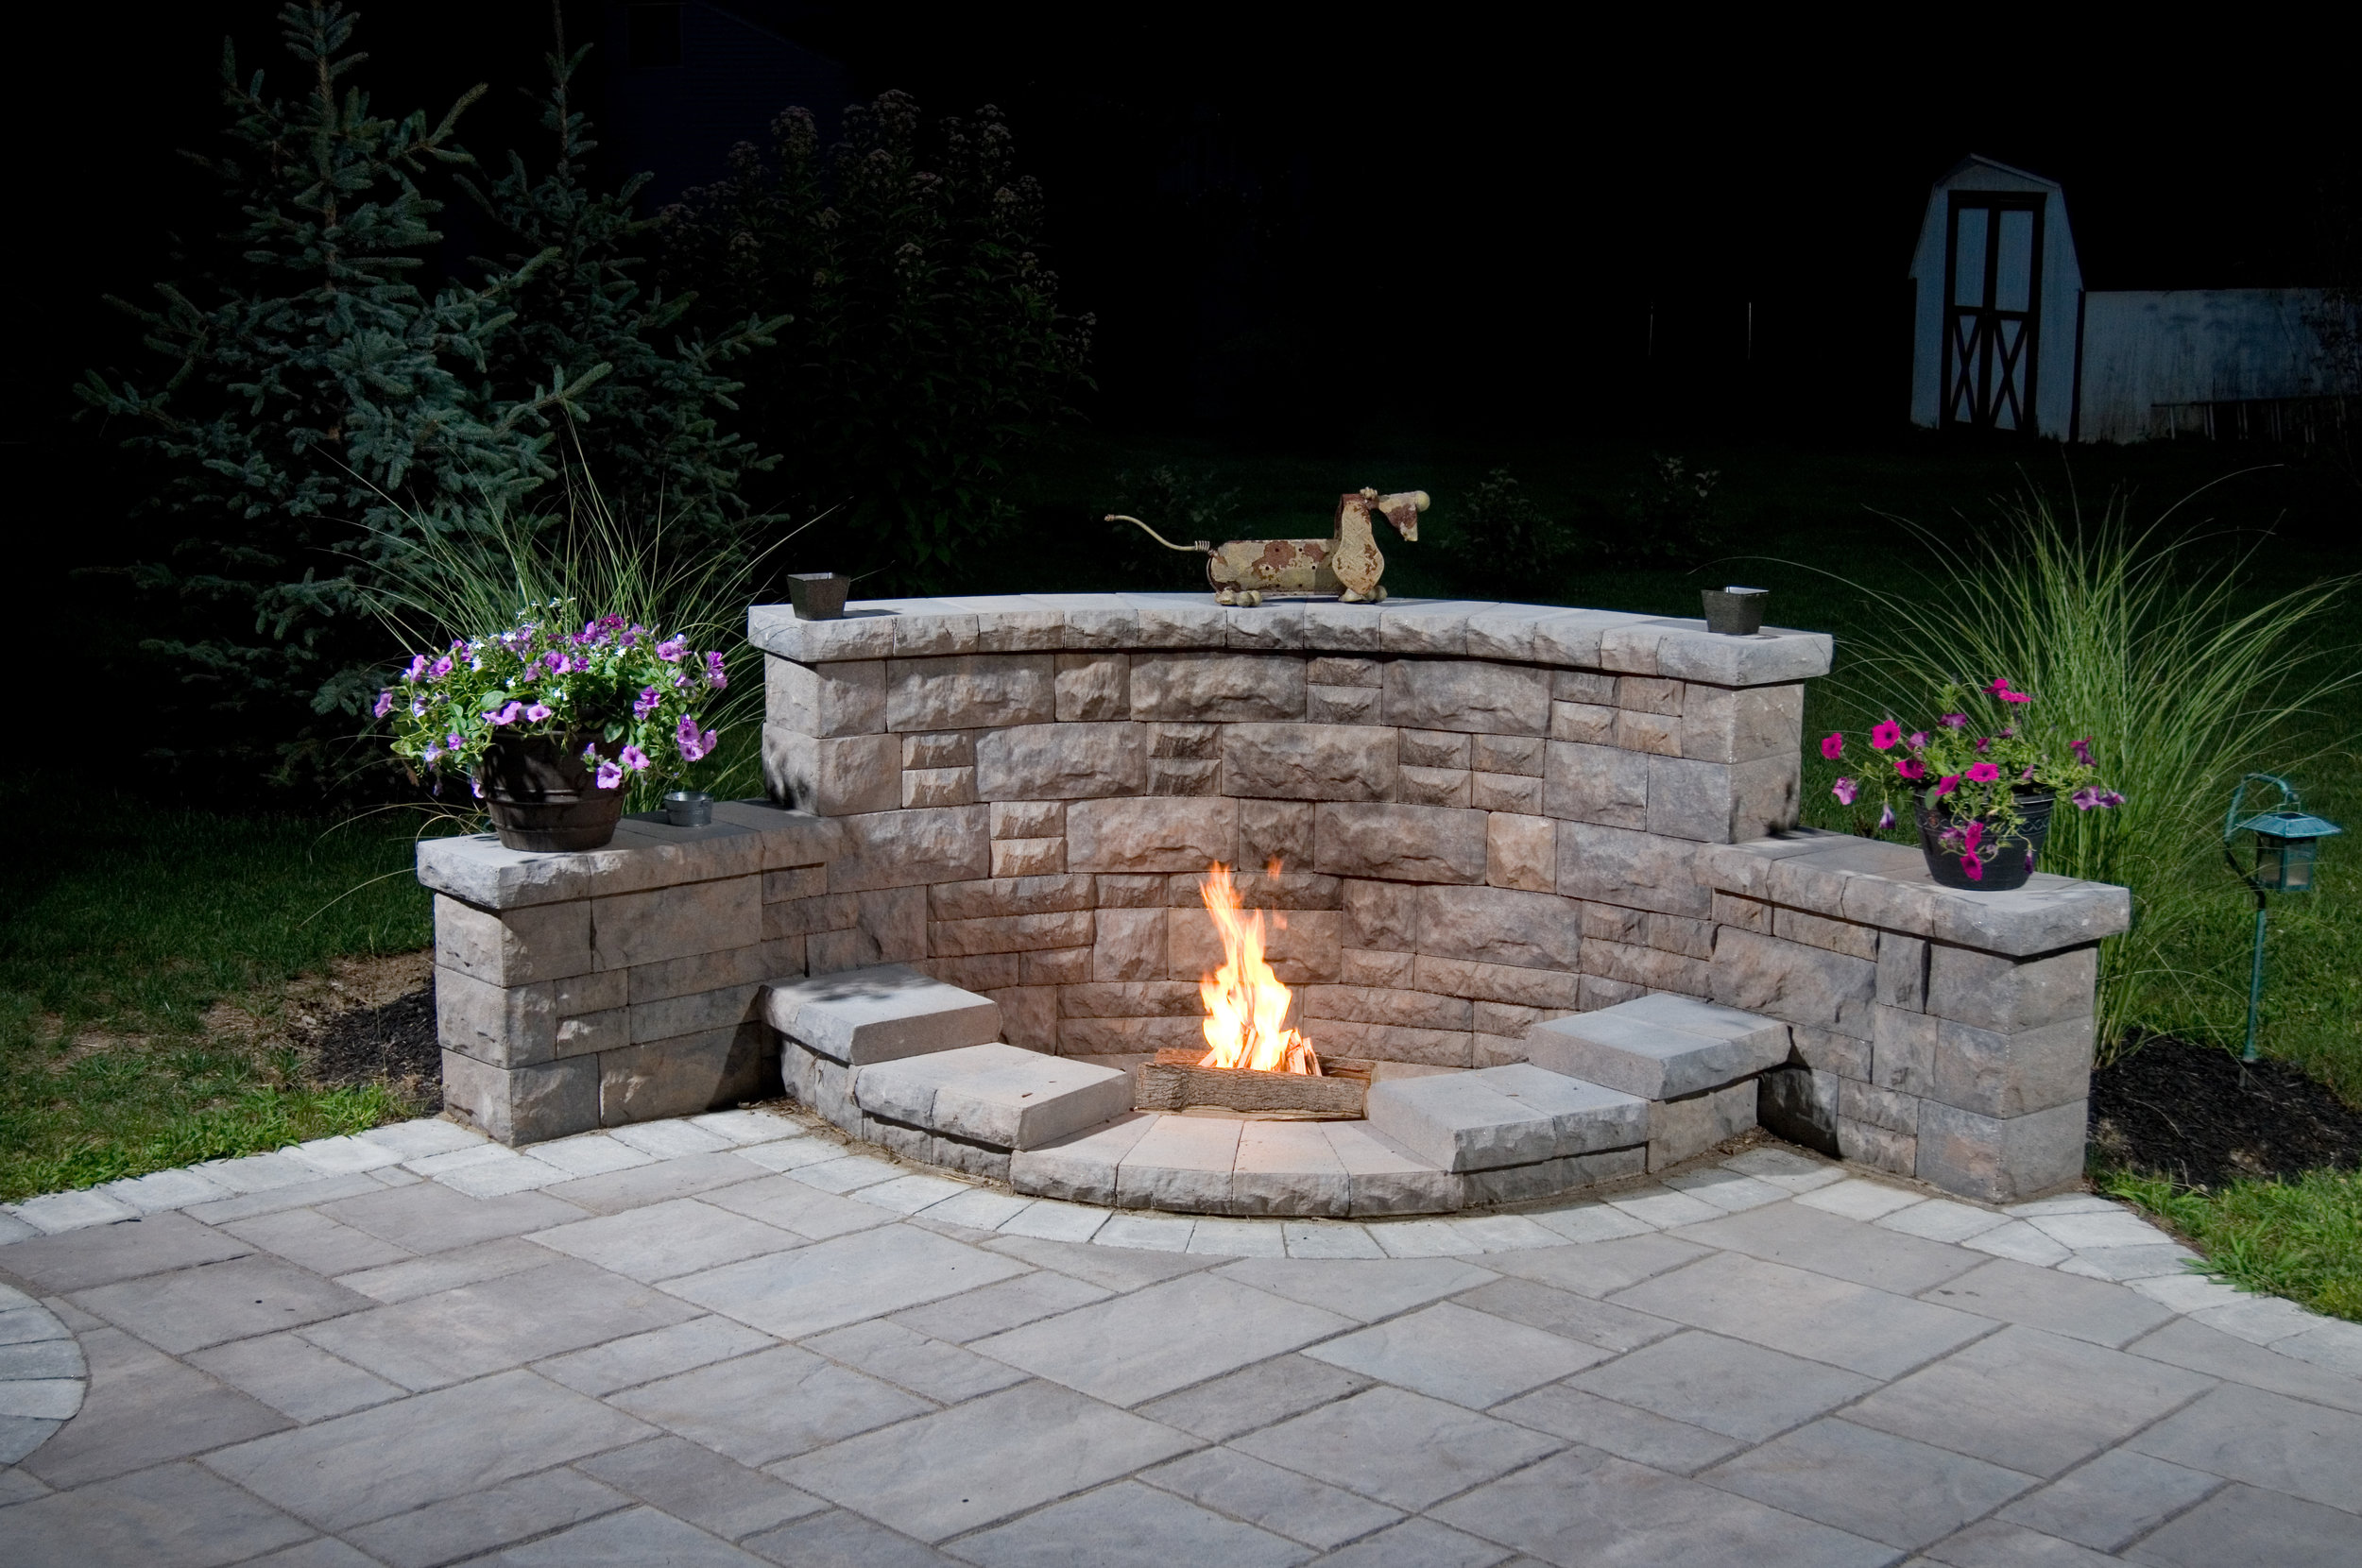 4 Beautiful Outdoor Fireplace And Fire, Design Outdoor Fire Pit Area